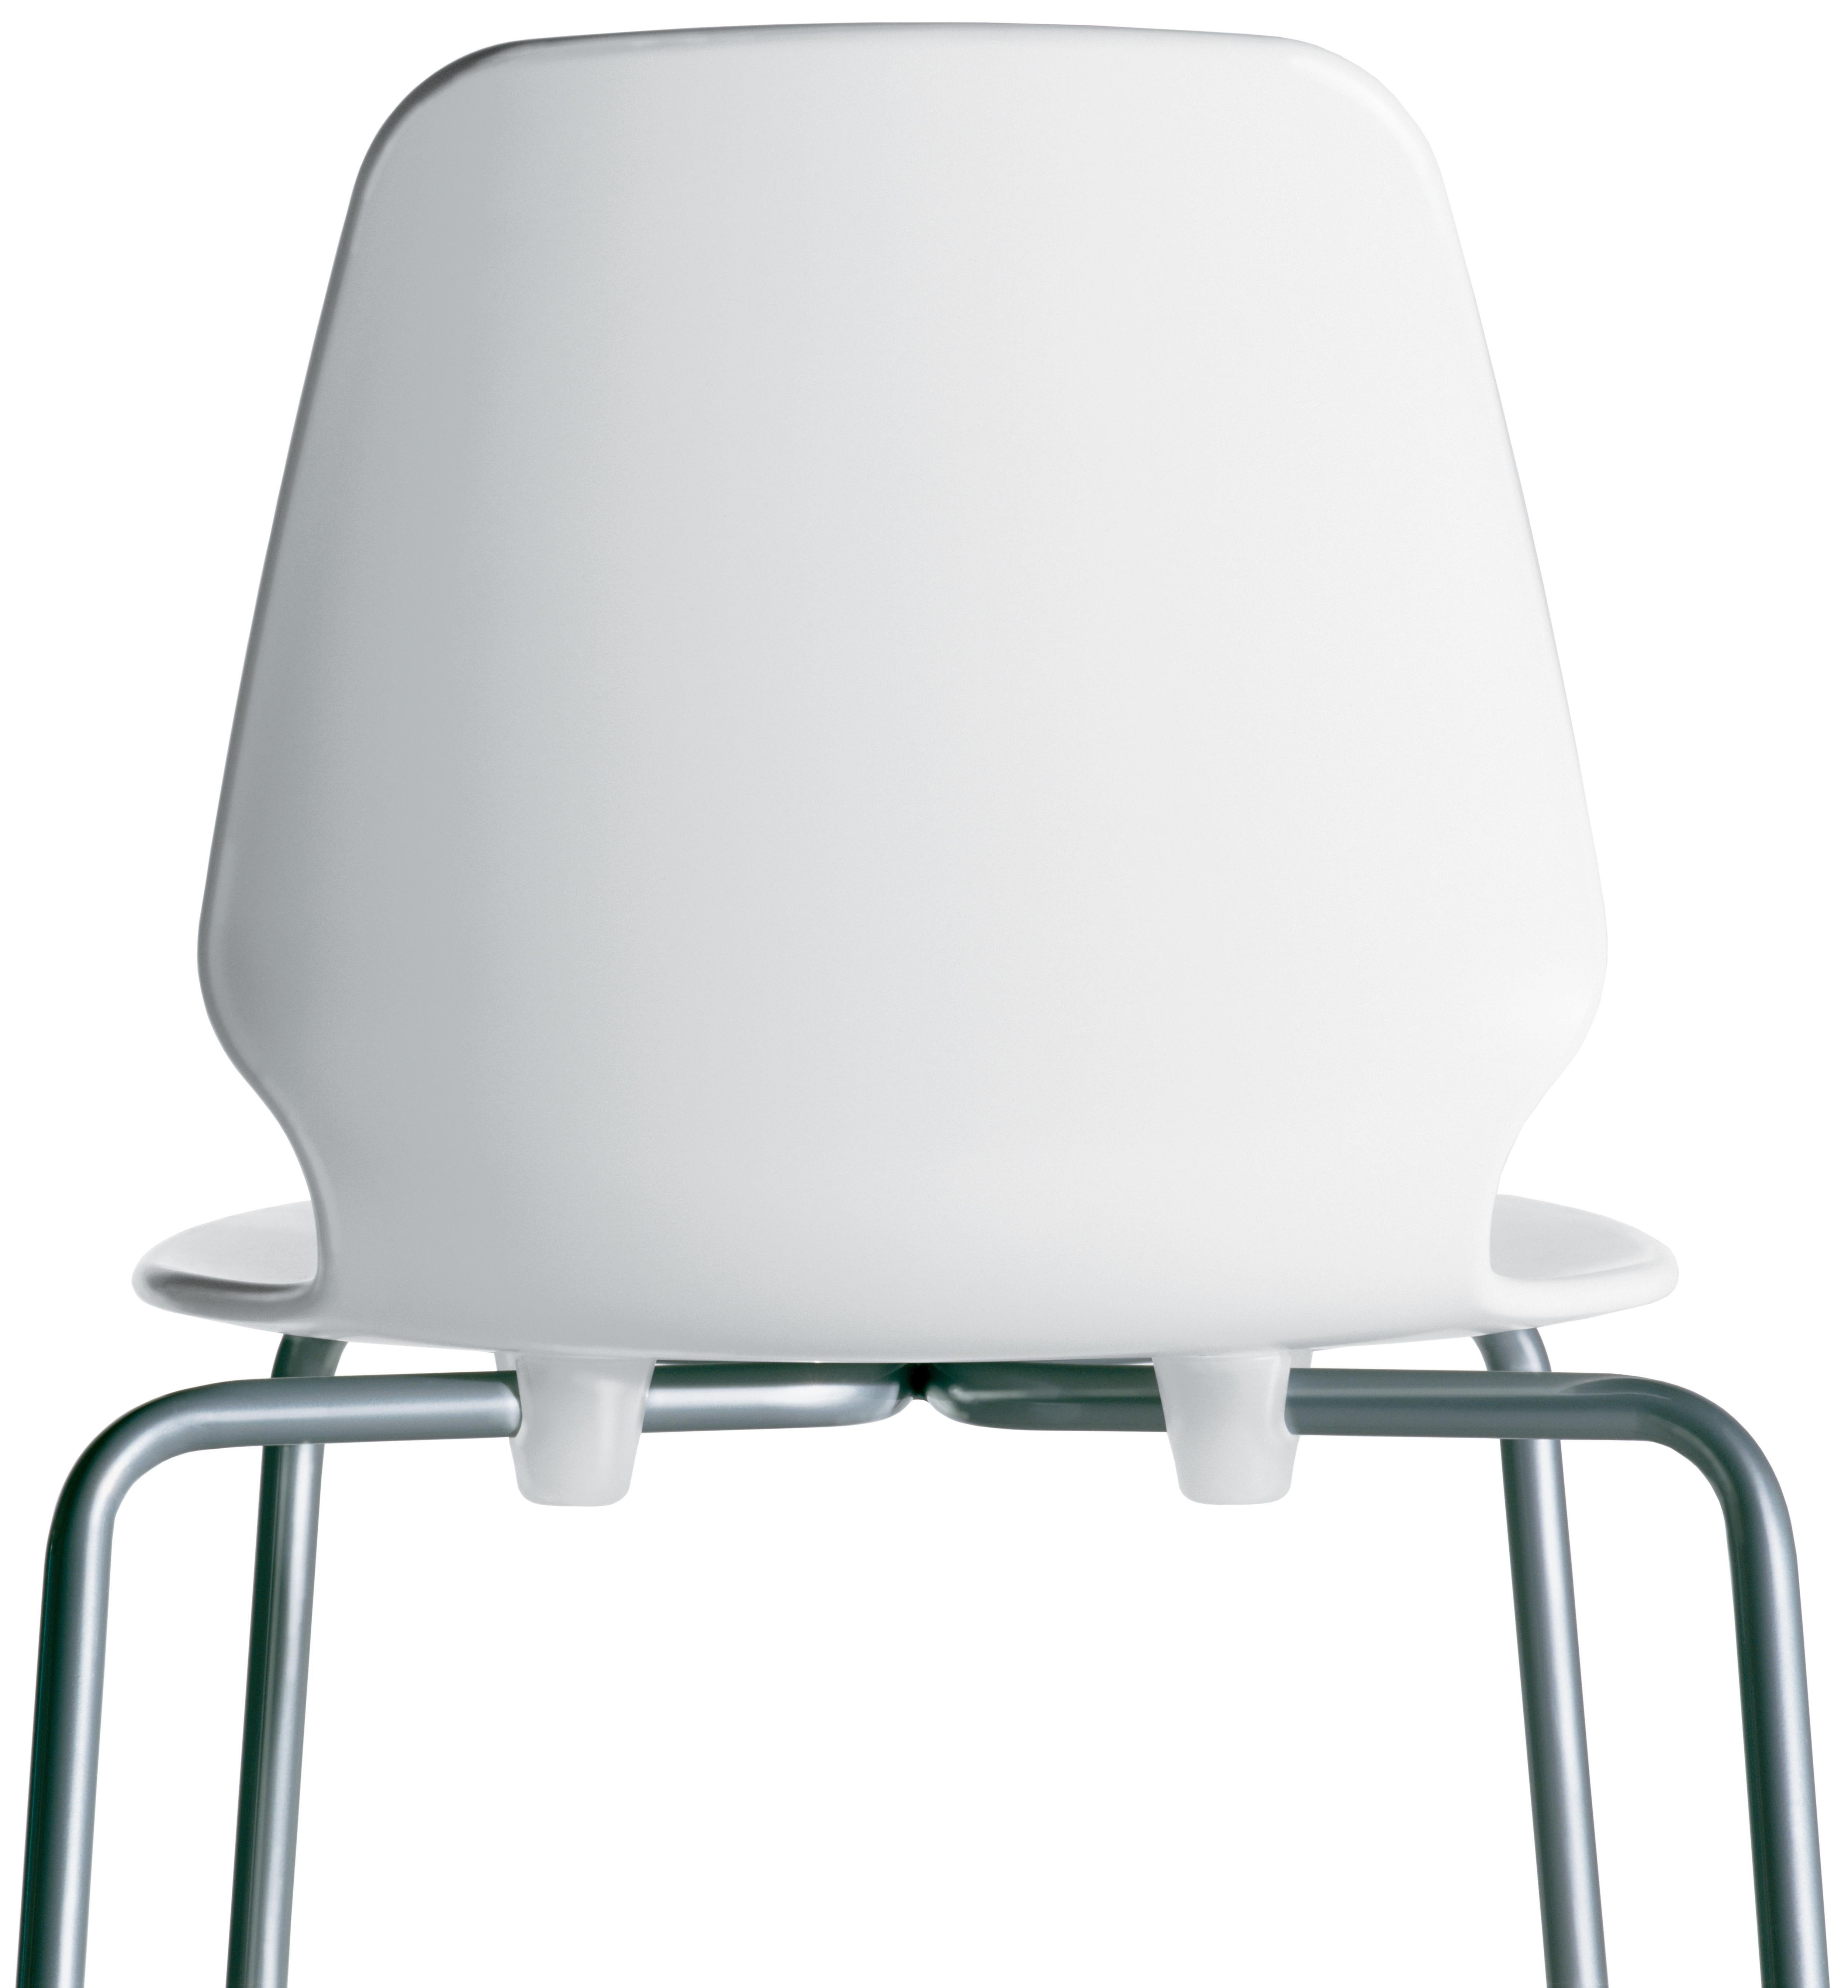 Alias 531 Selinunte Sledge Chair in White Seat and Sand Lacquered Steel Frame In New Condition For Sale In Brooklyn, NY